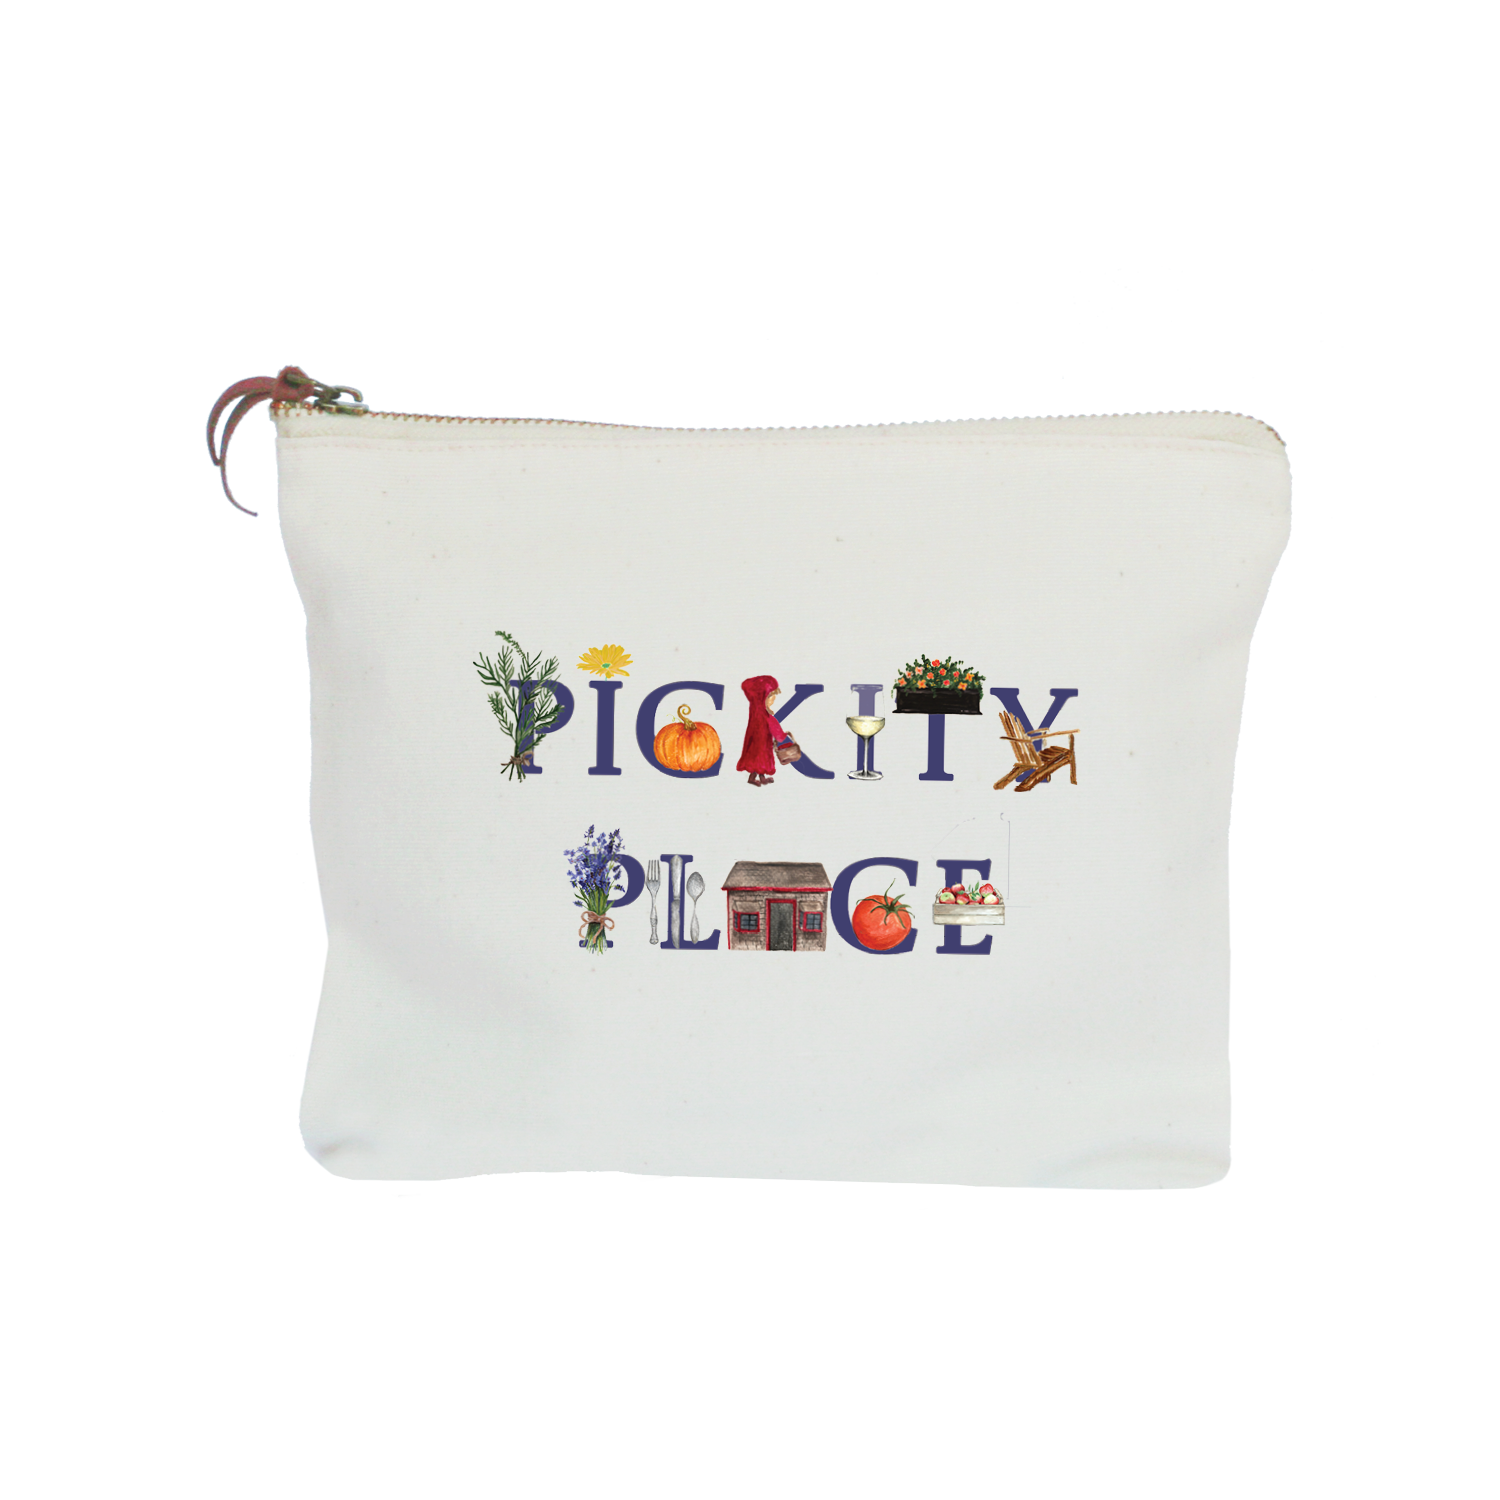 pickity place zipper pouch